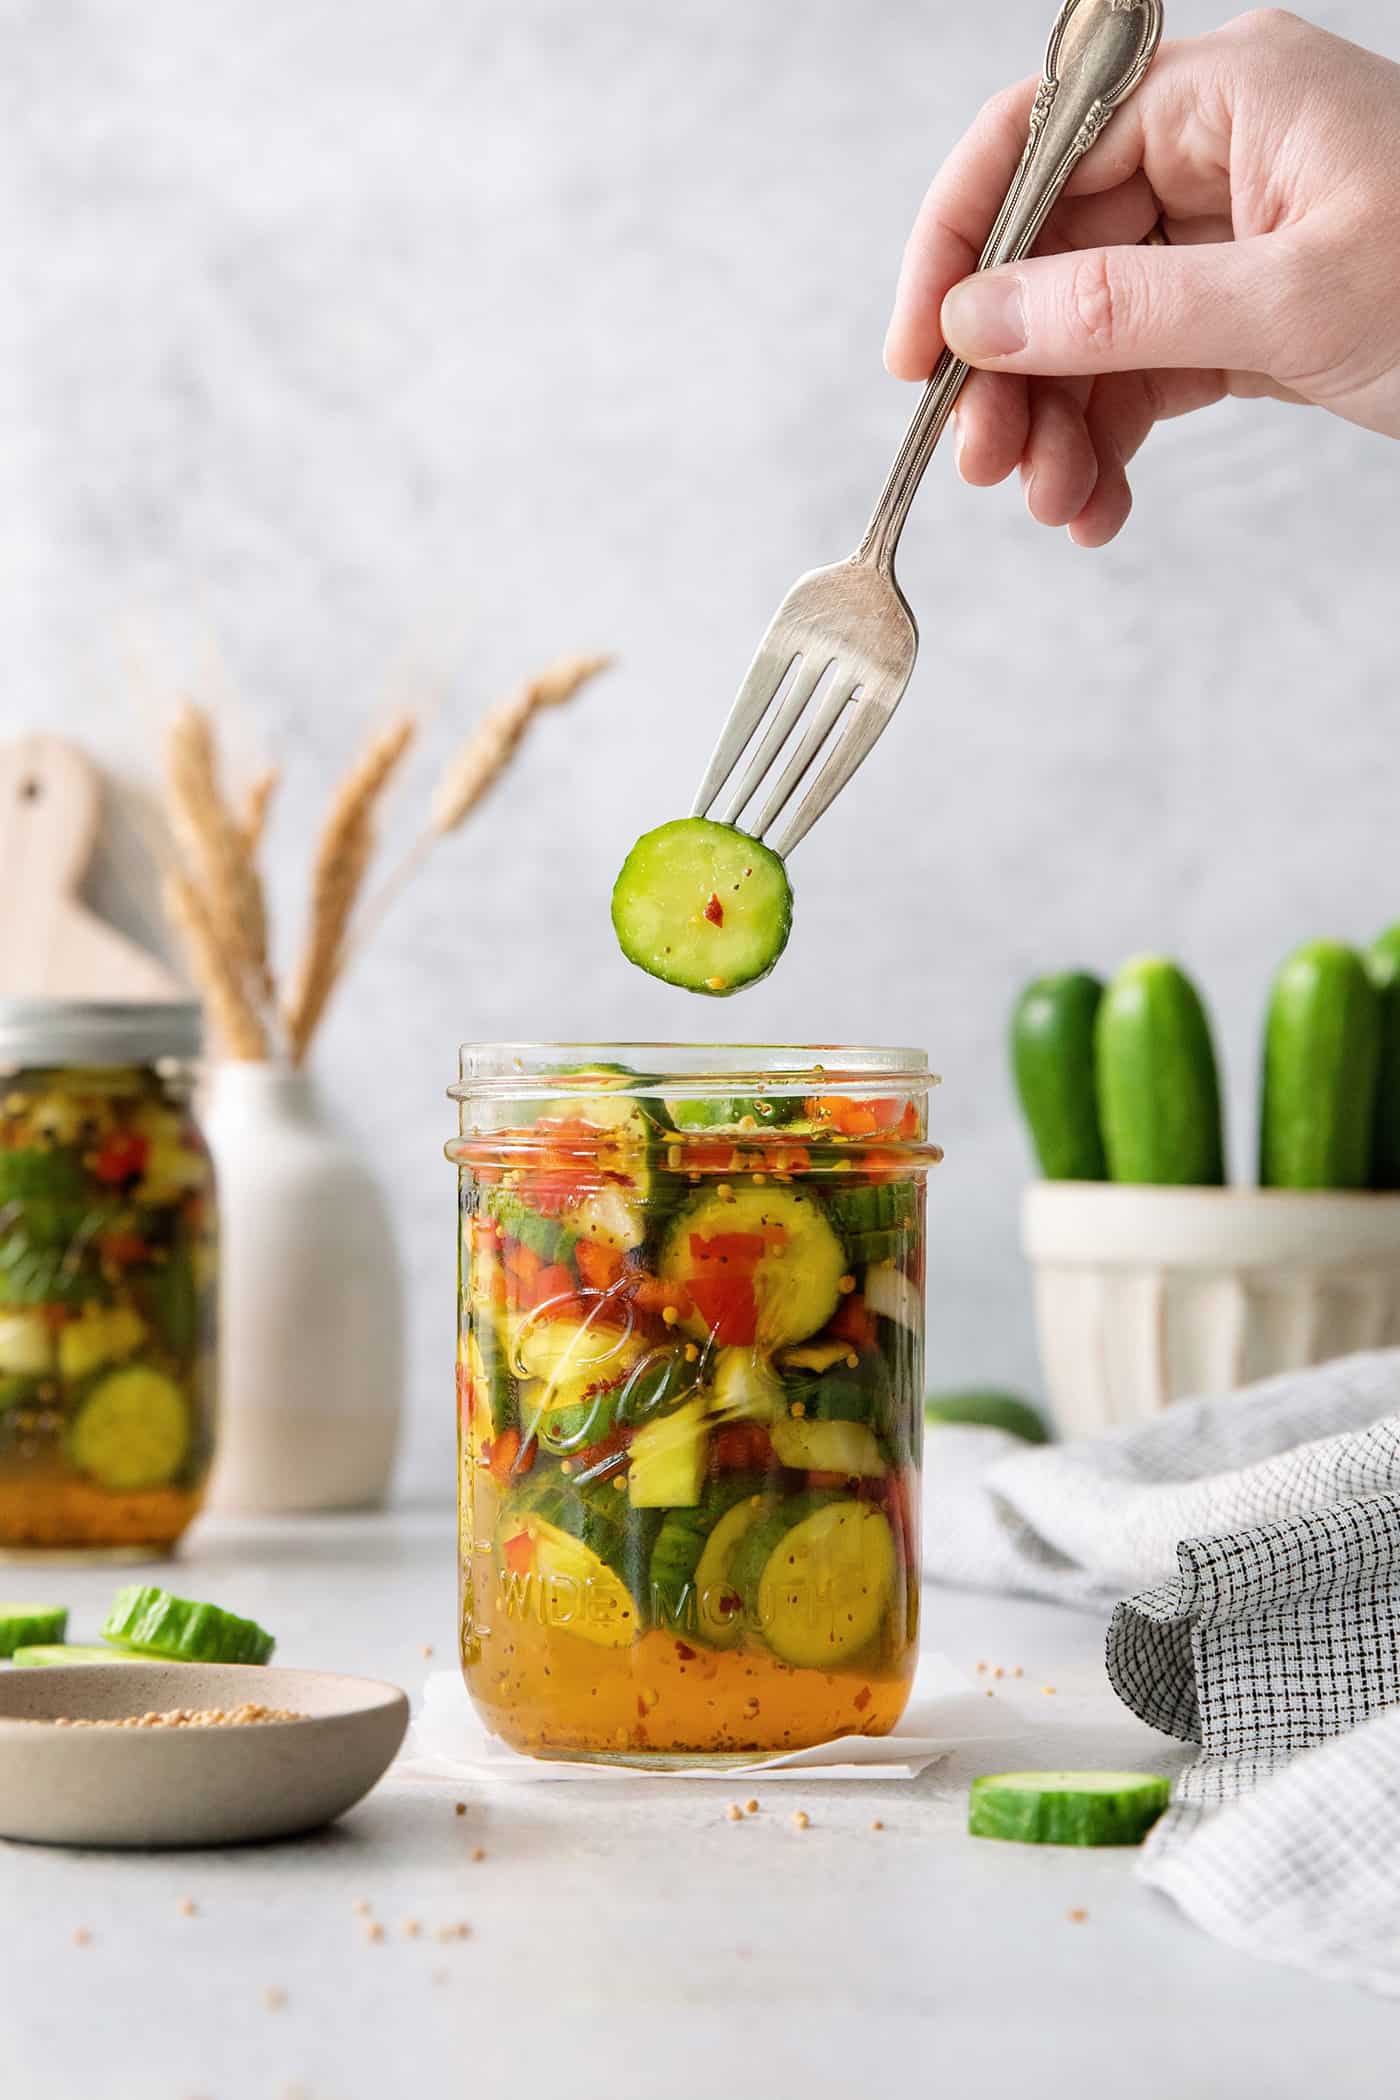 A fork holds a sweet and spicy pickle above a jar.